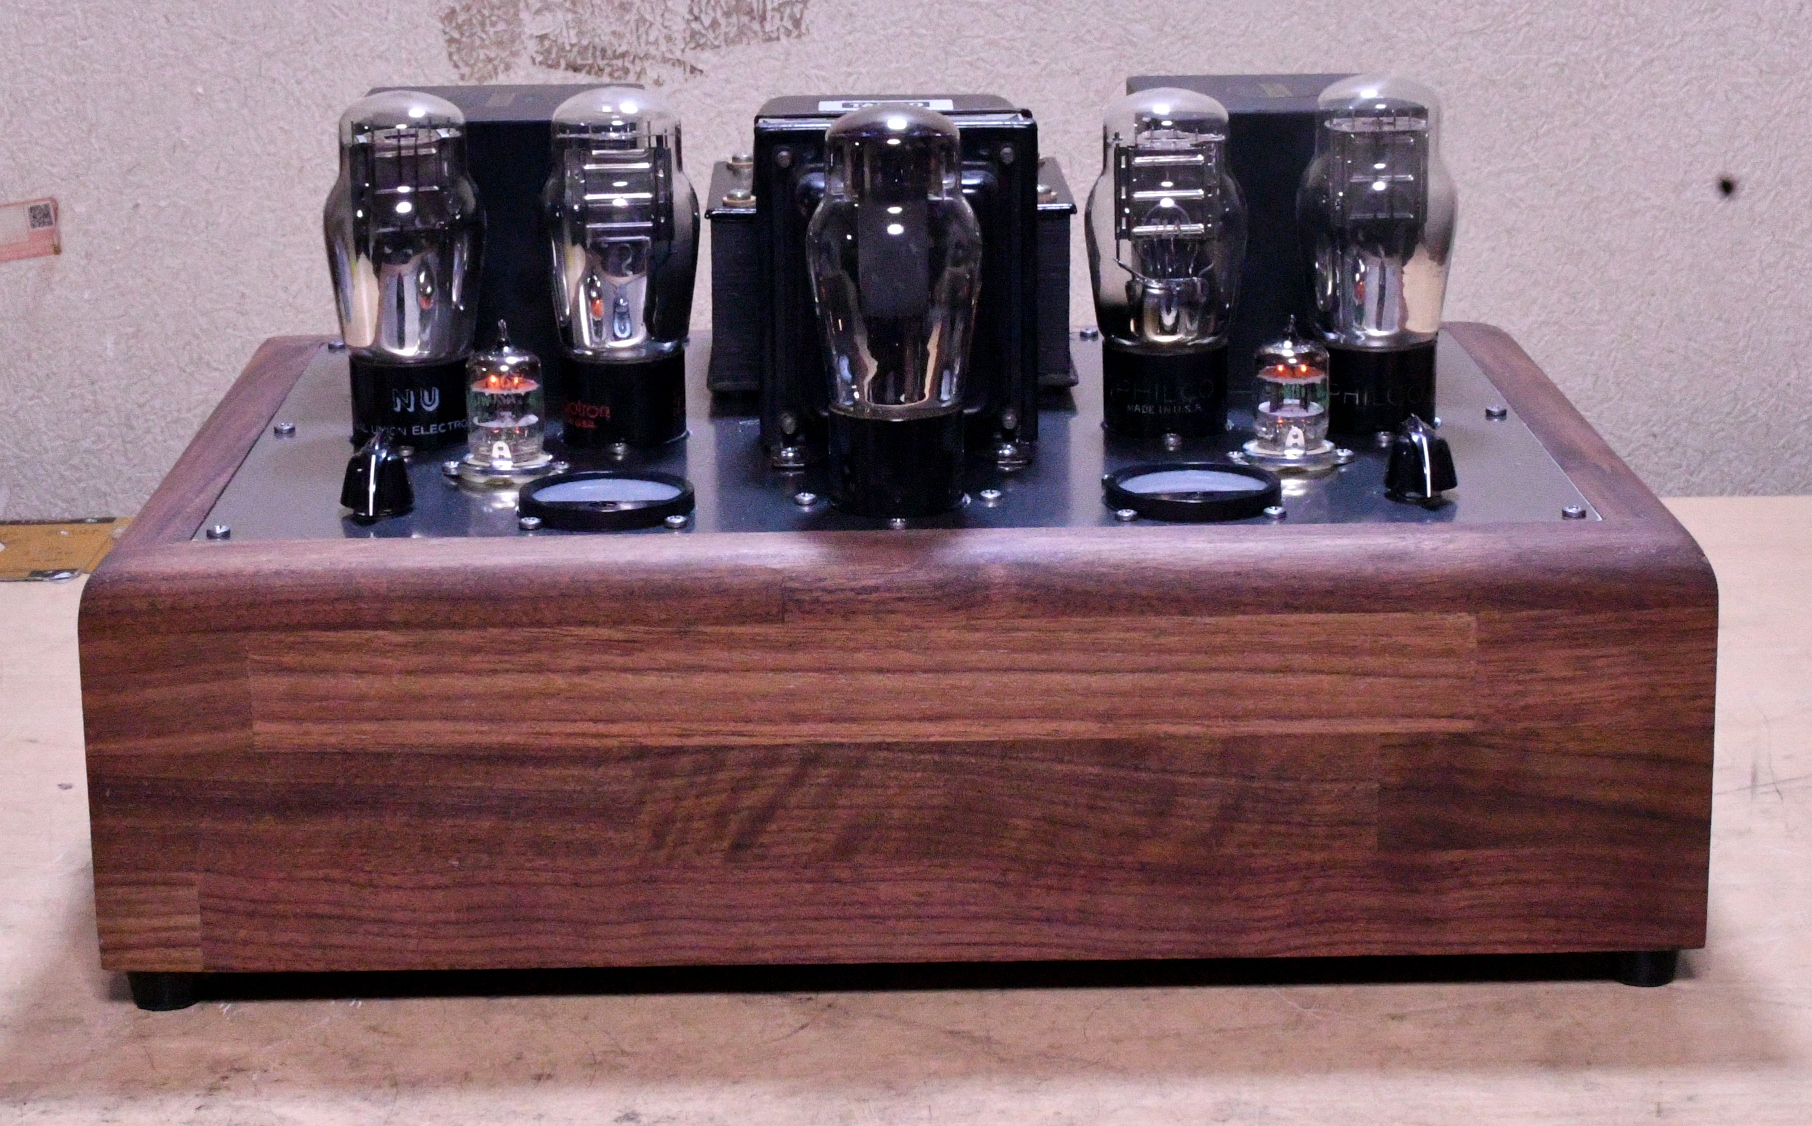 396A drive 71APP tube amp stereo with vintage Tango transformers